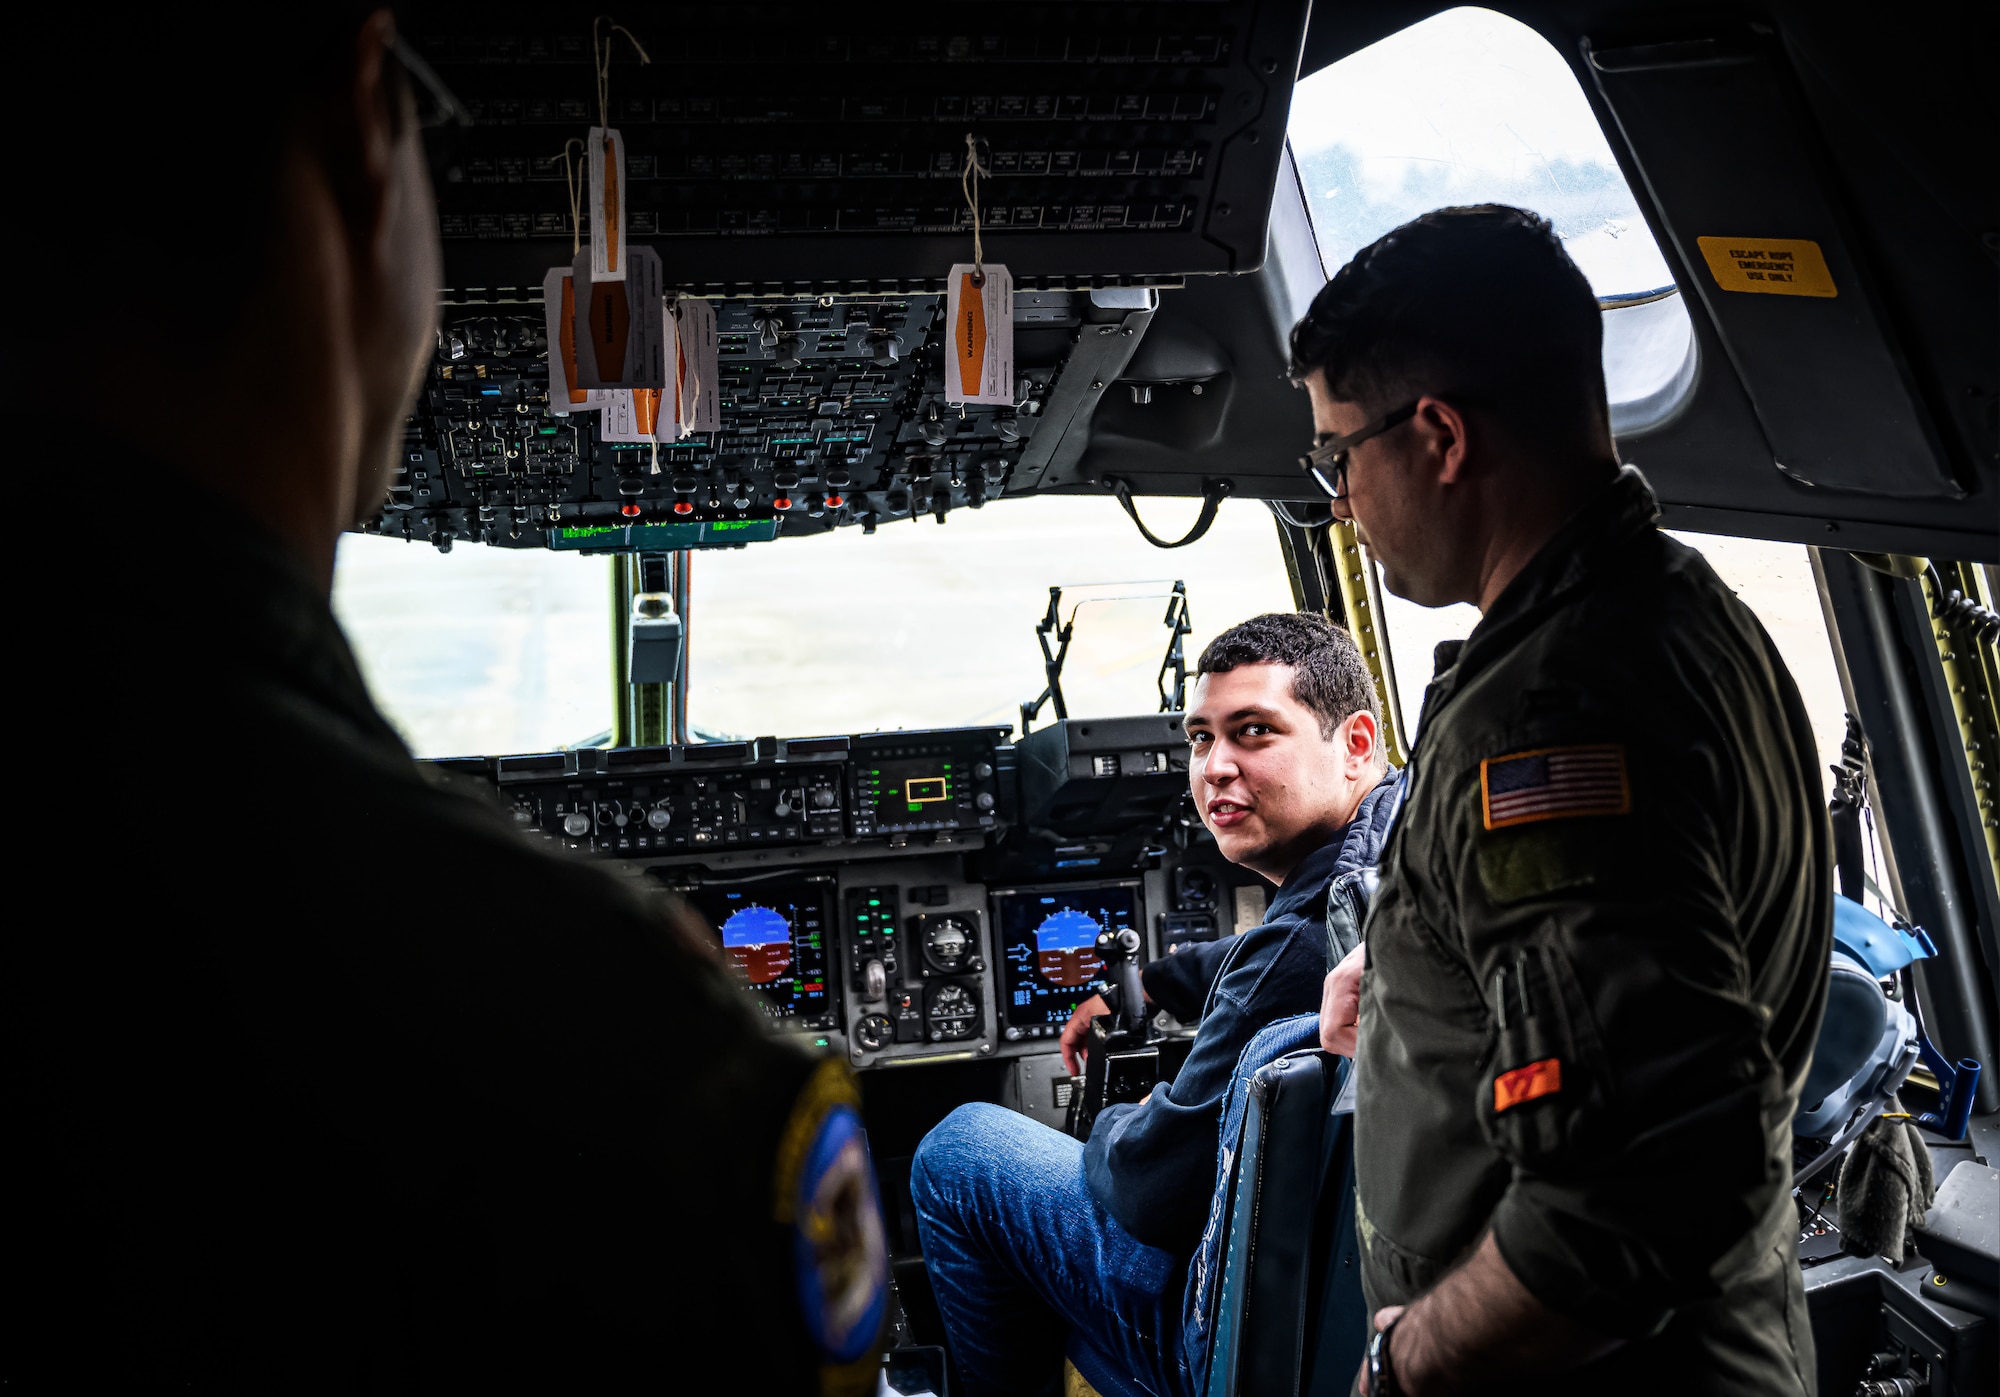 A civilian pilot tours the cockpit of a C-17 Globemaster III at Joint Base McGuire-Dix-Lakehurst, N.J., April 20, 2024. The Mid-Air Collision Avoidance program is designed to ensure safety practices are observed between military and civilian pilots who share a common airspace. (U.S. Air Force photo by Senior Airman Matt Porter)